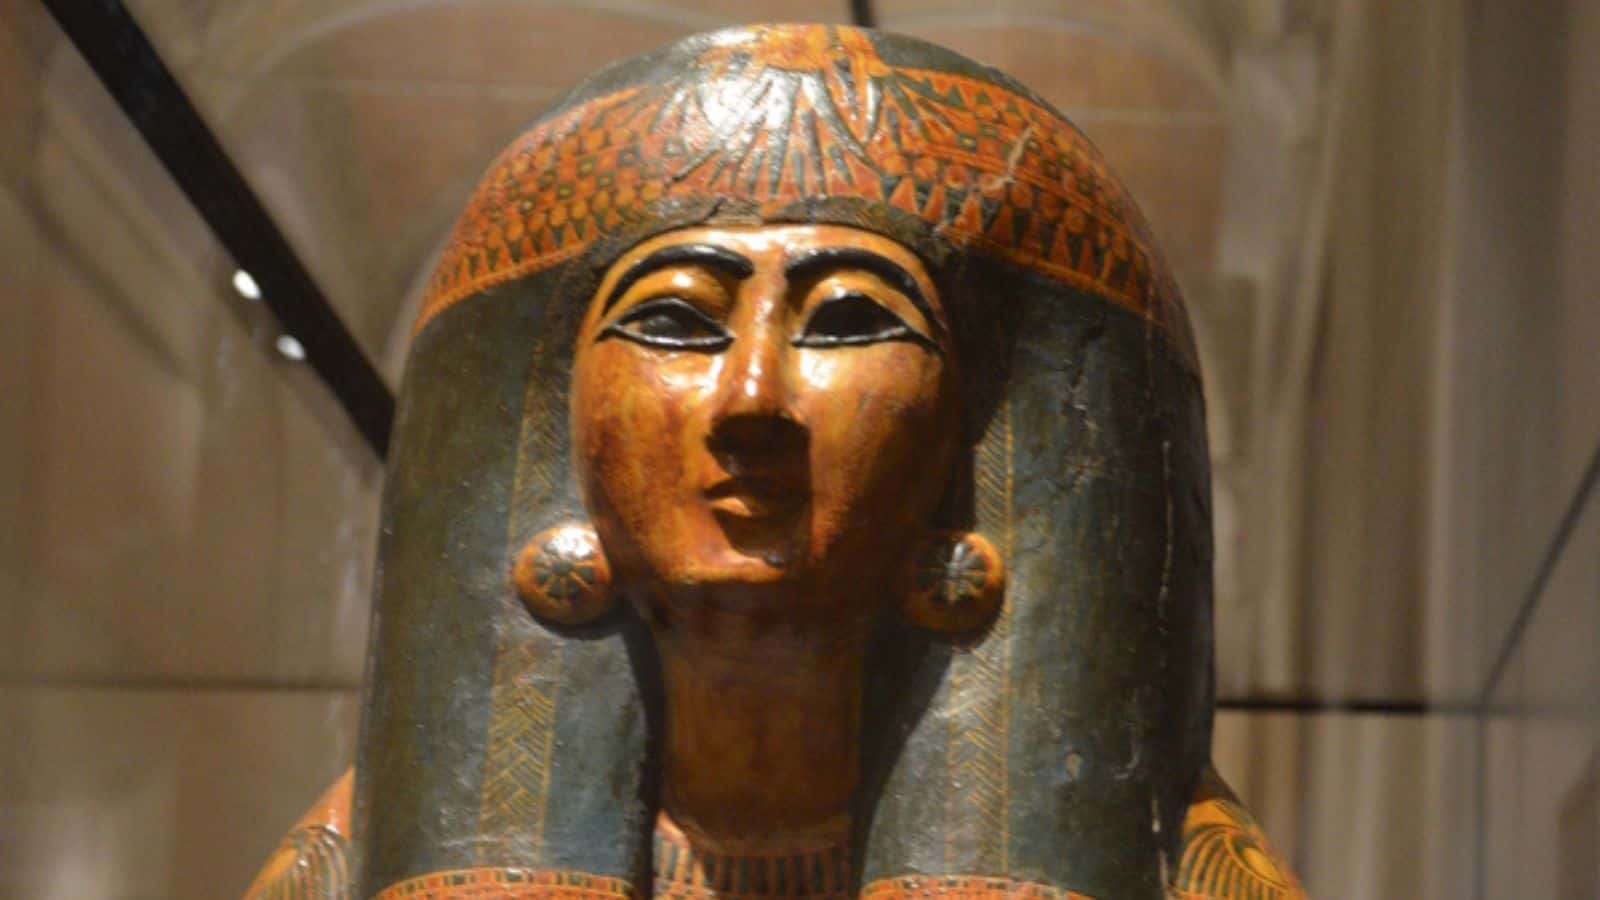 Exhibition of mummies, artifacts and Egyptian finds at the Egyptian Museum of Turin